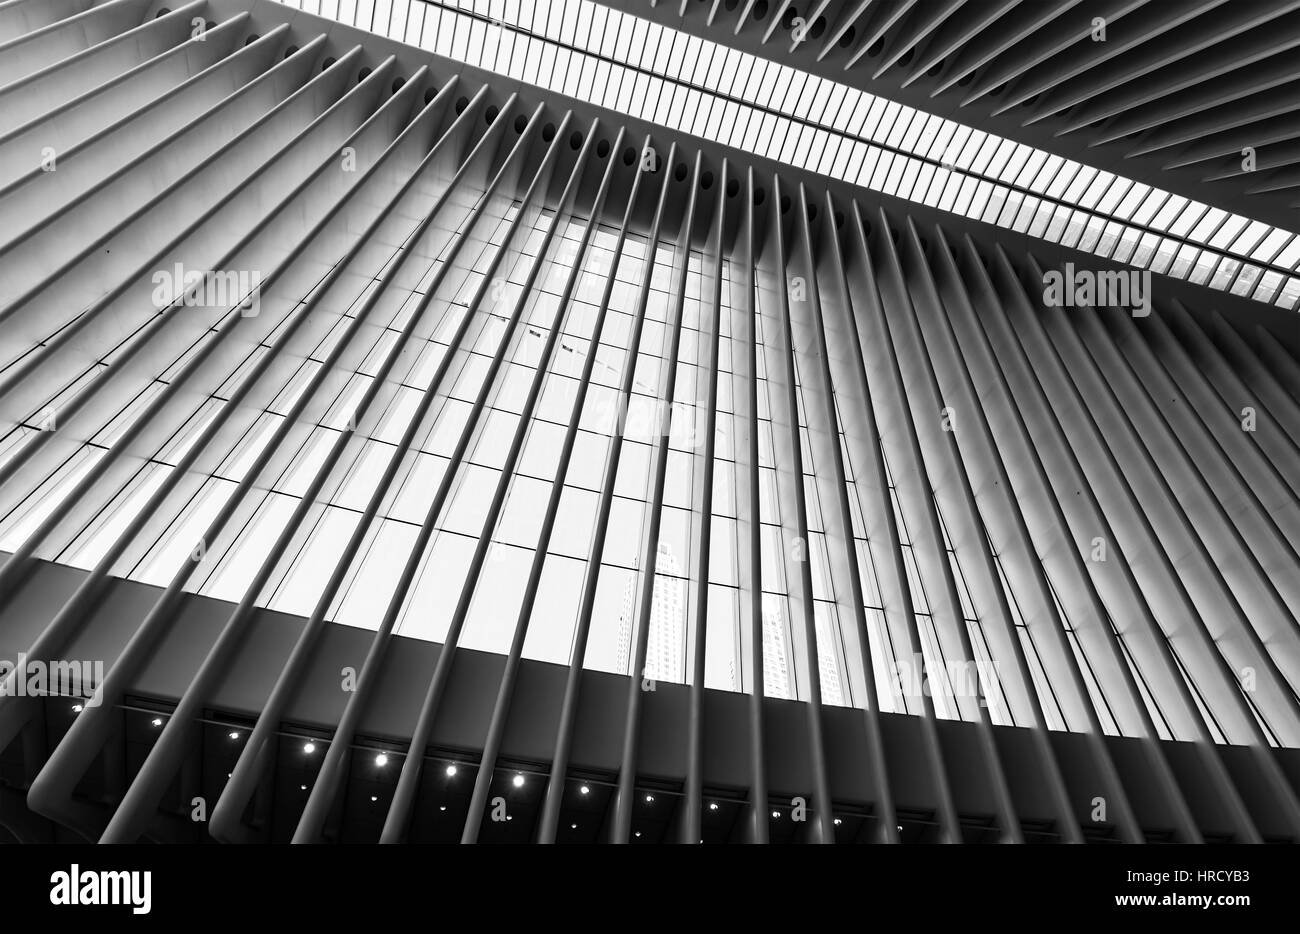 The Oculus train station in New York Stock Photo